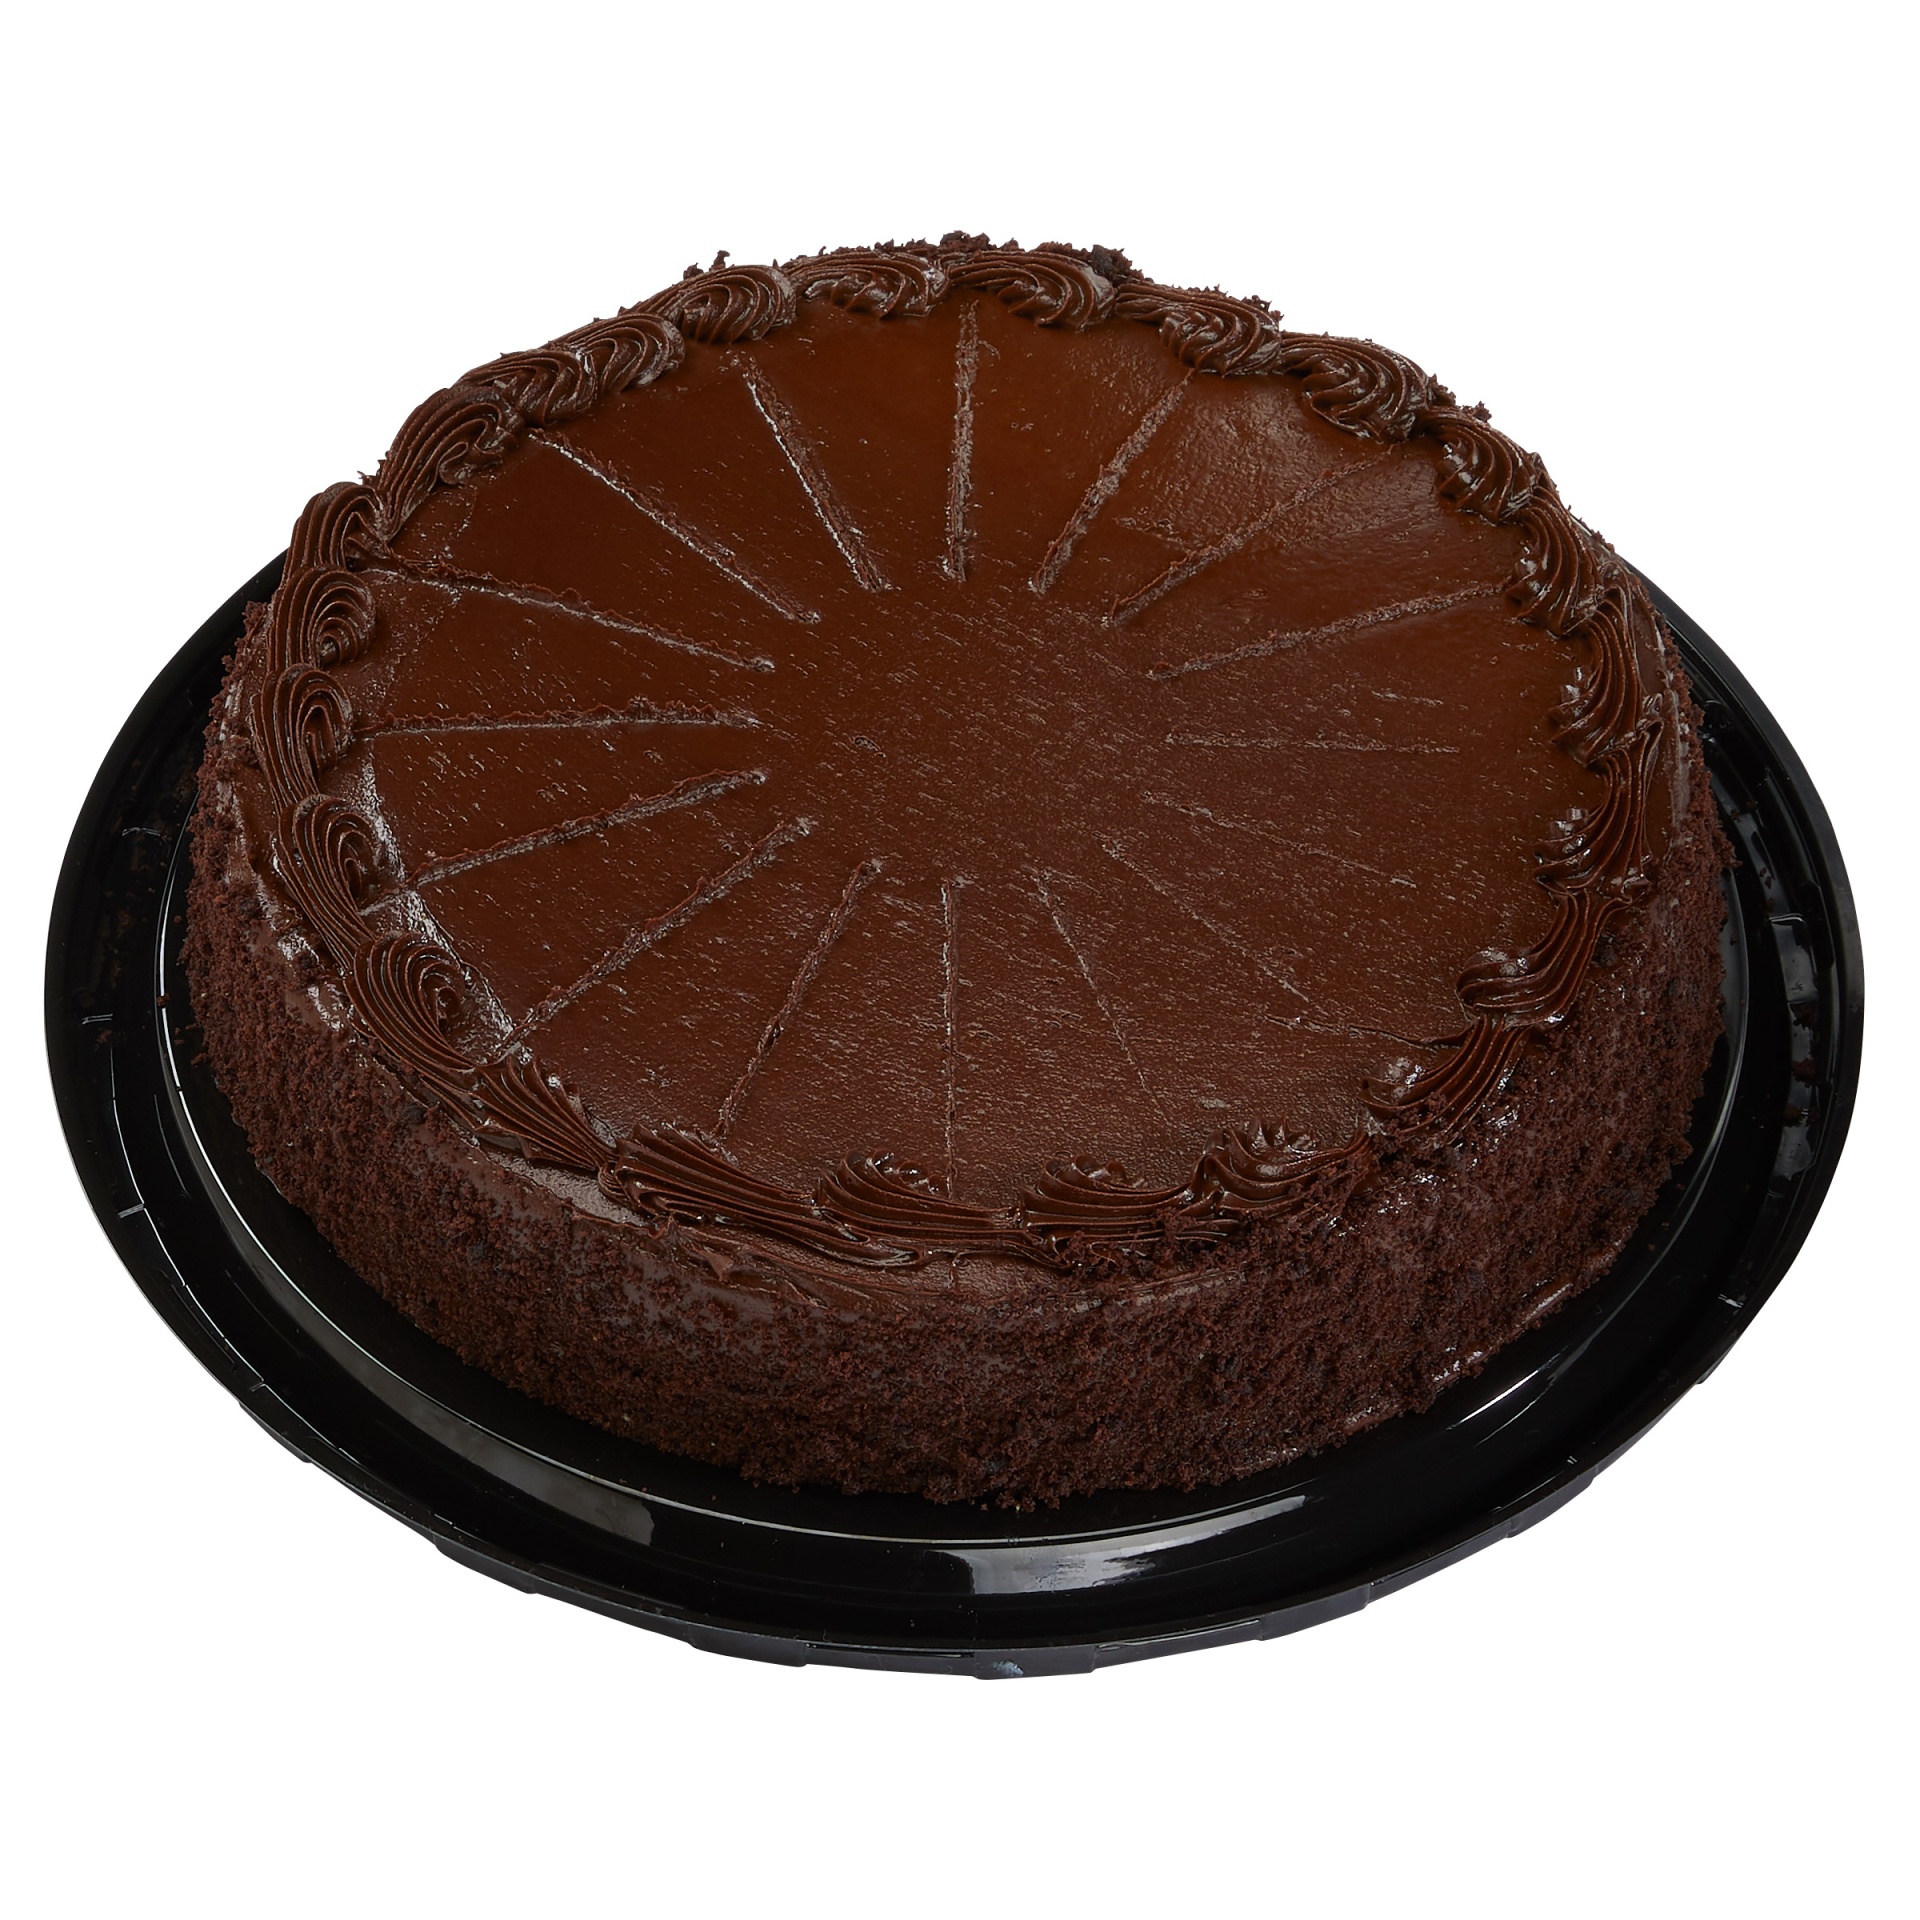 Calories in Olive Garden Black Tie Mousse Cake and Nutrition Facts